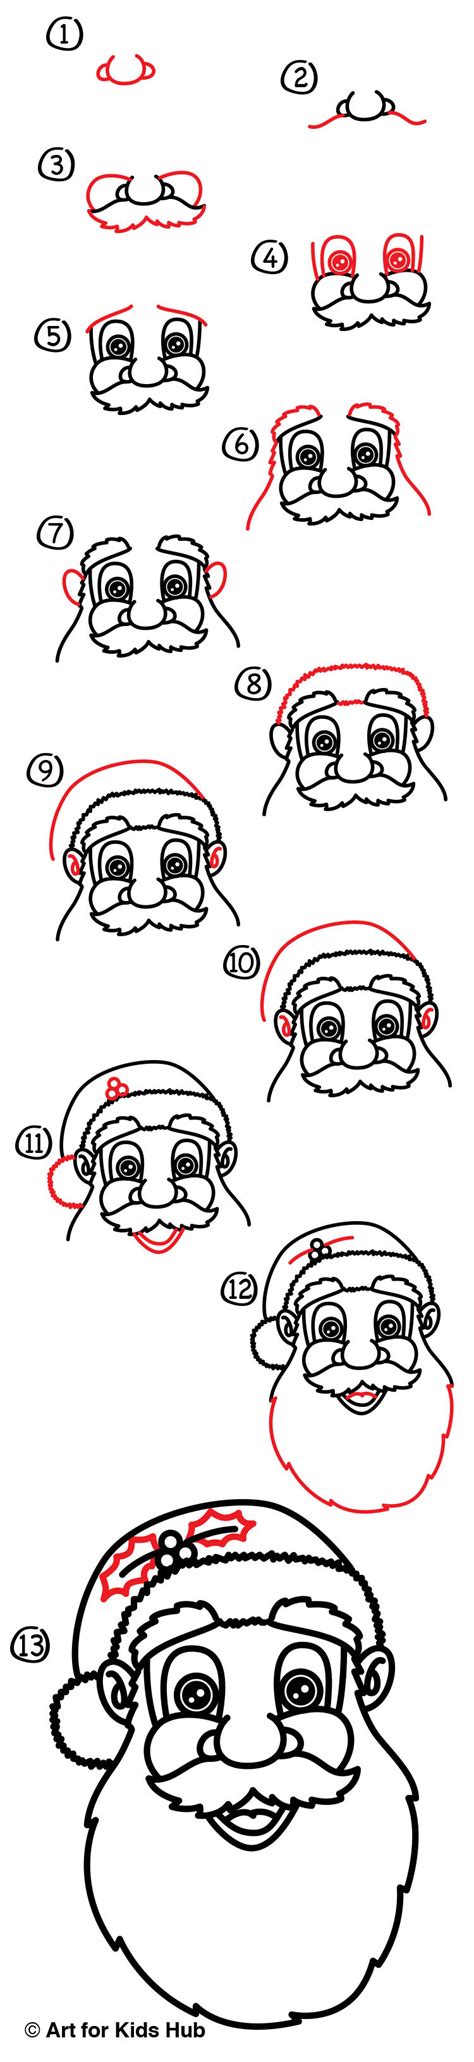 As the santa clause is drawn, the little kids can easily draw now many more things to decorate their tree. How To Draw Santa Claus's Face - Art For Kids Hub